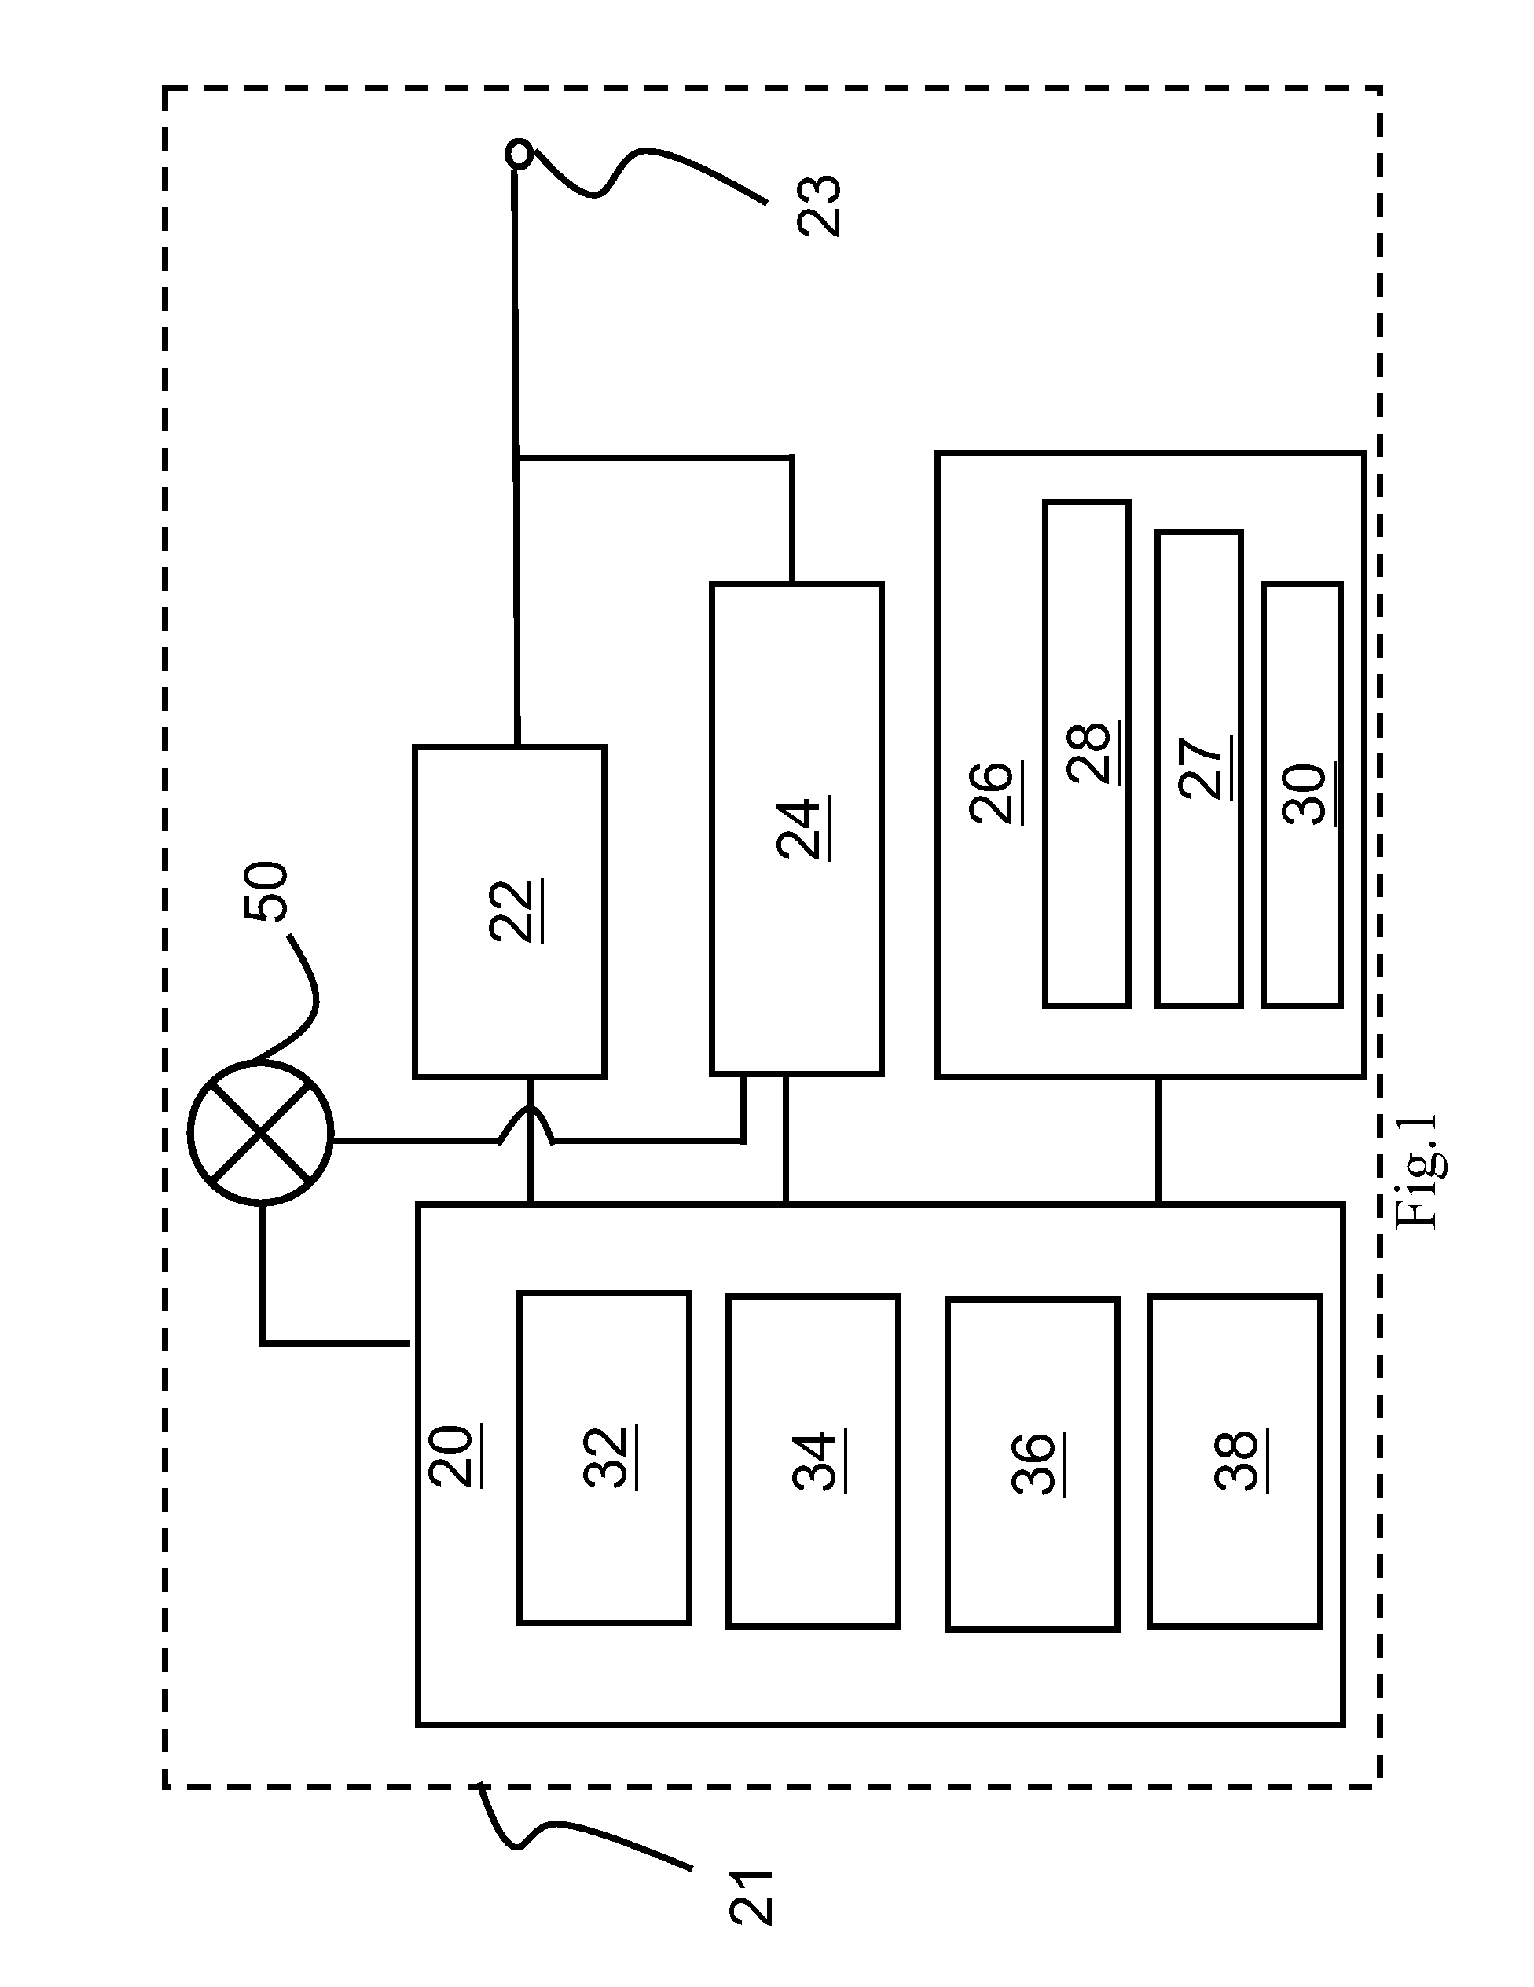 Apparatus and system for LED street lamp monitoring and control